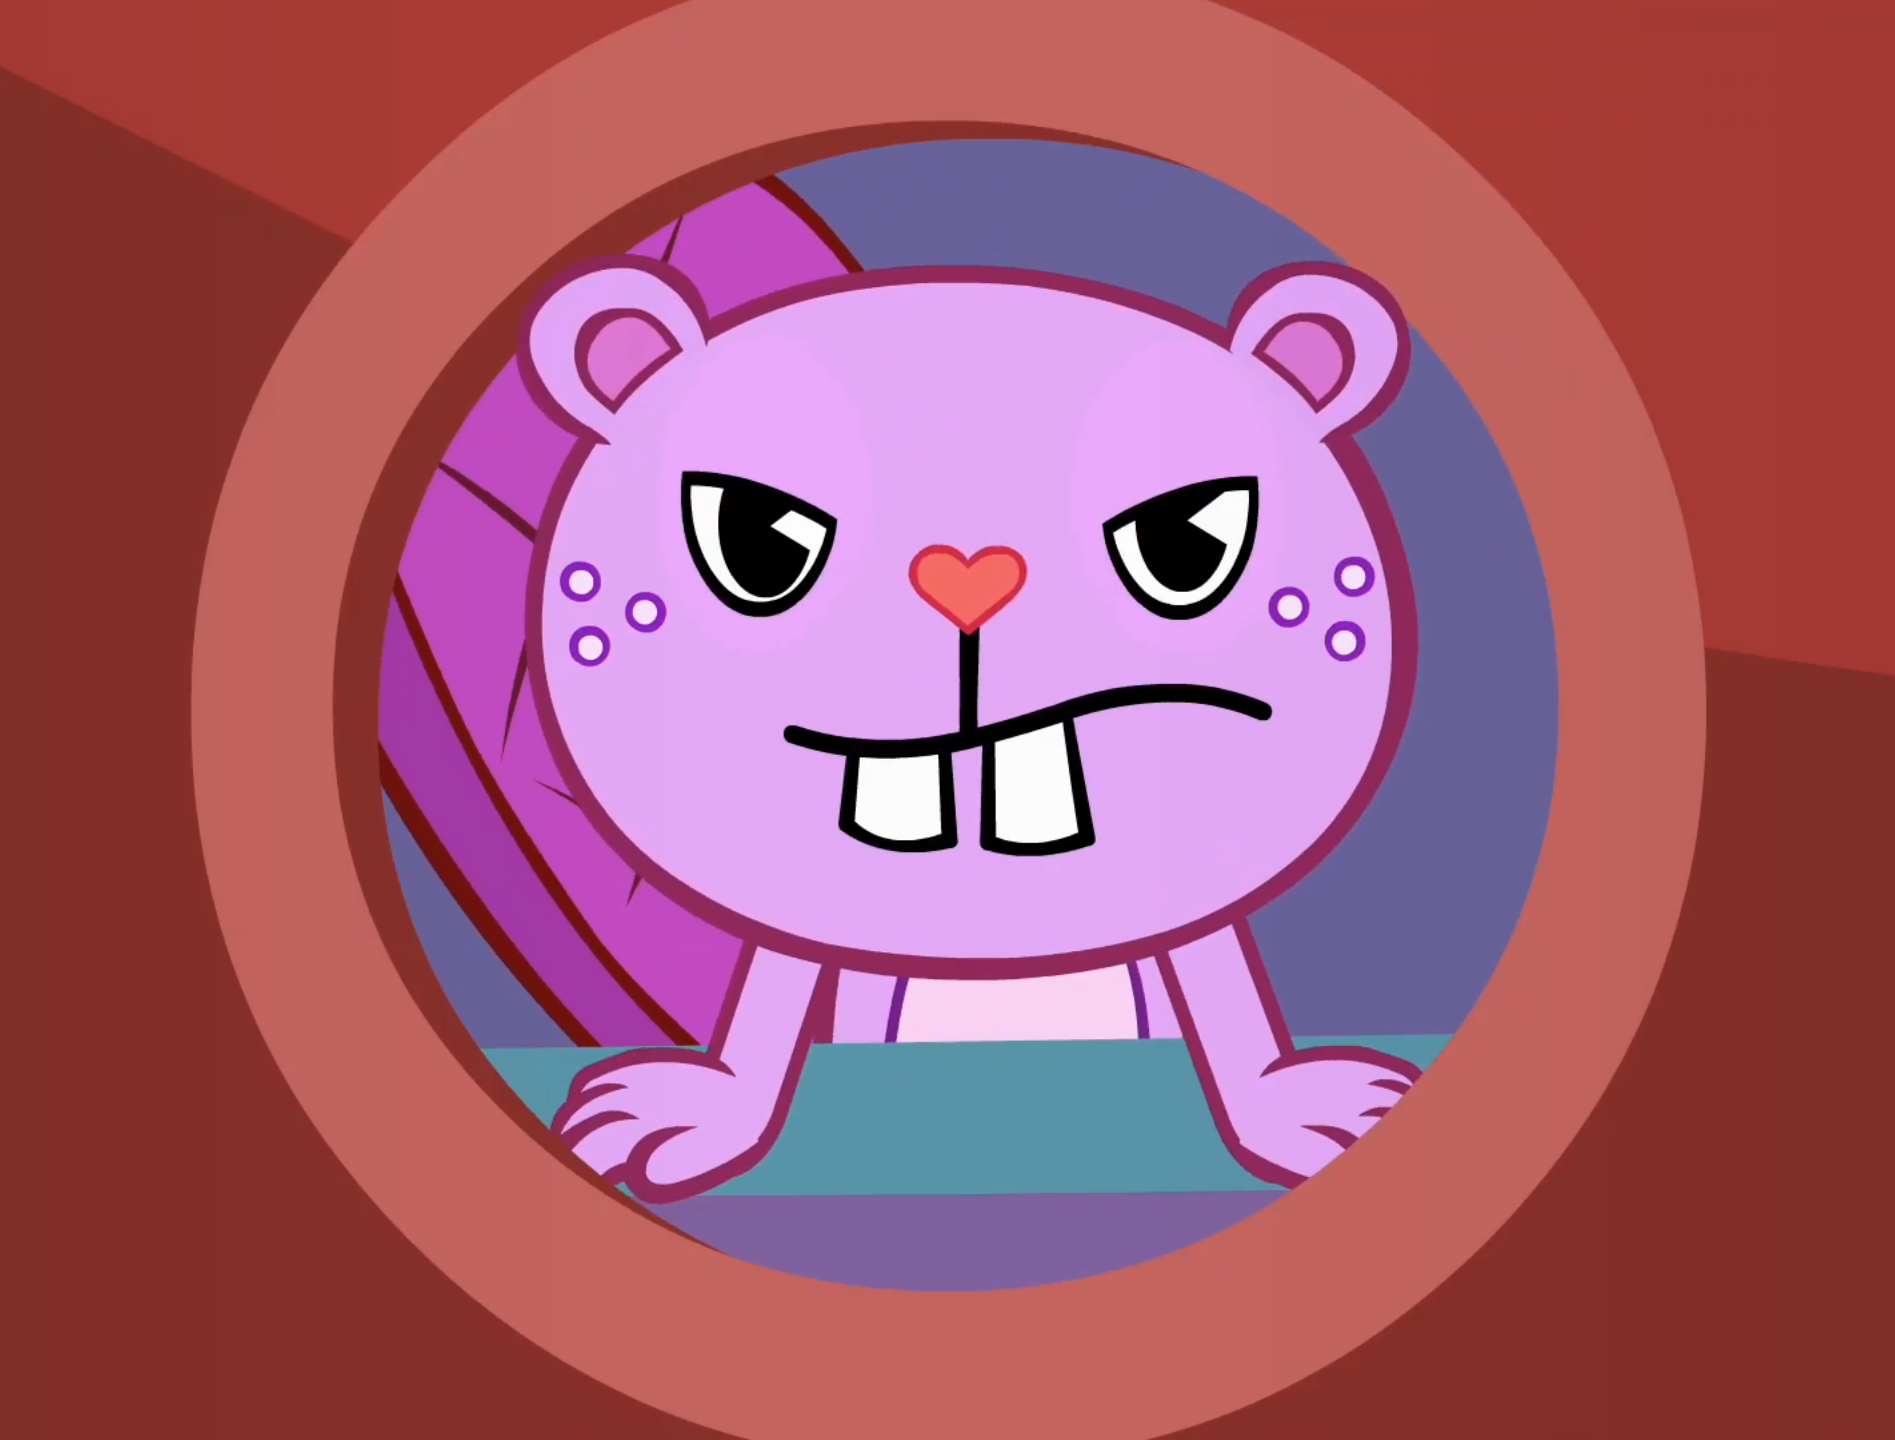 toothy happy tree friends